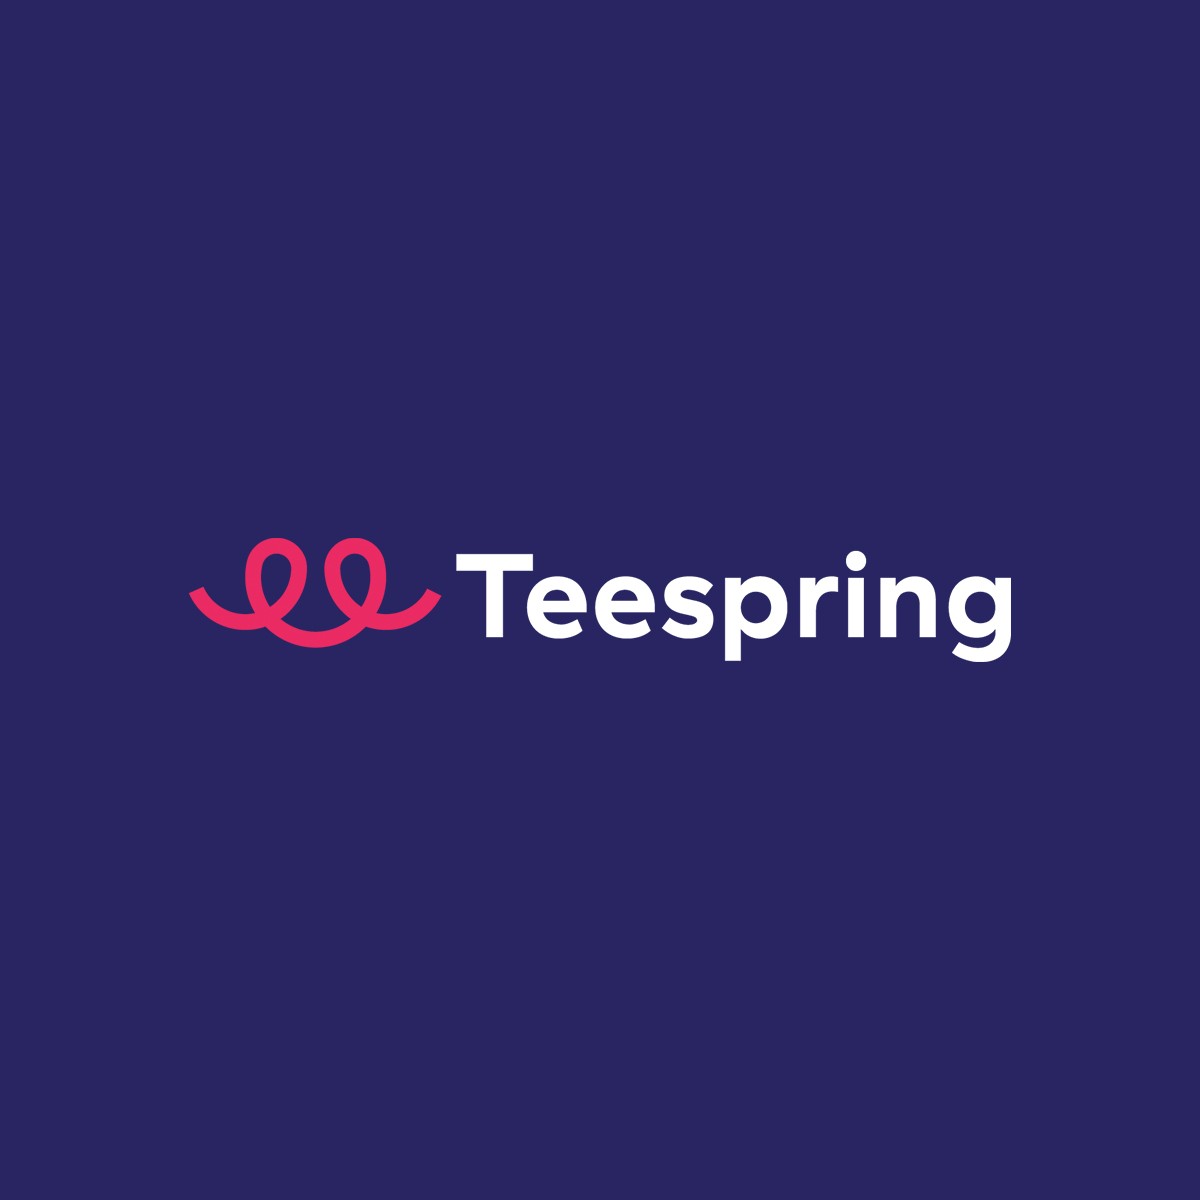 teespring og image rebranded - Making Money with TeeSpring (Crowdfunding Review)